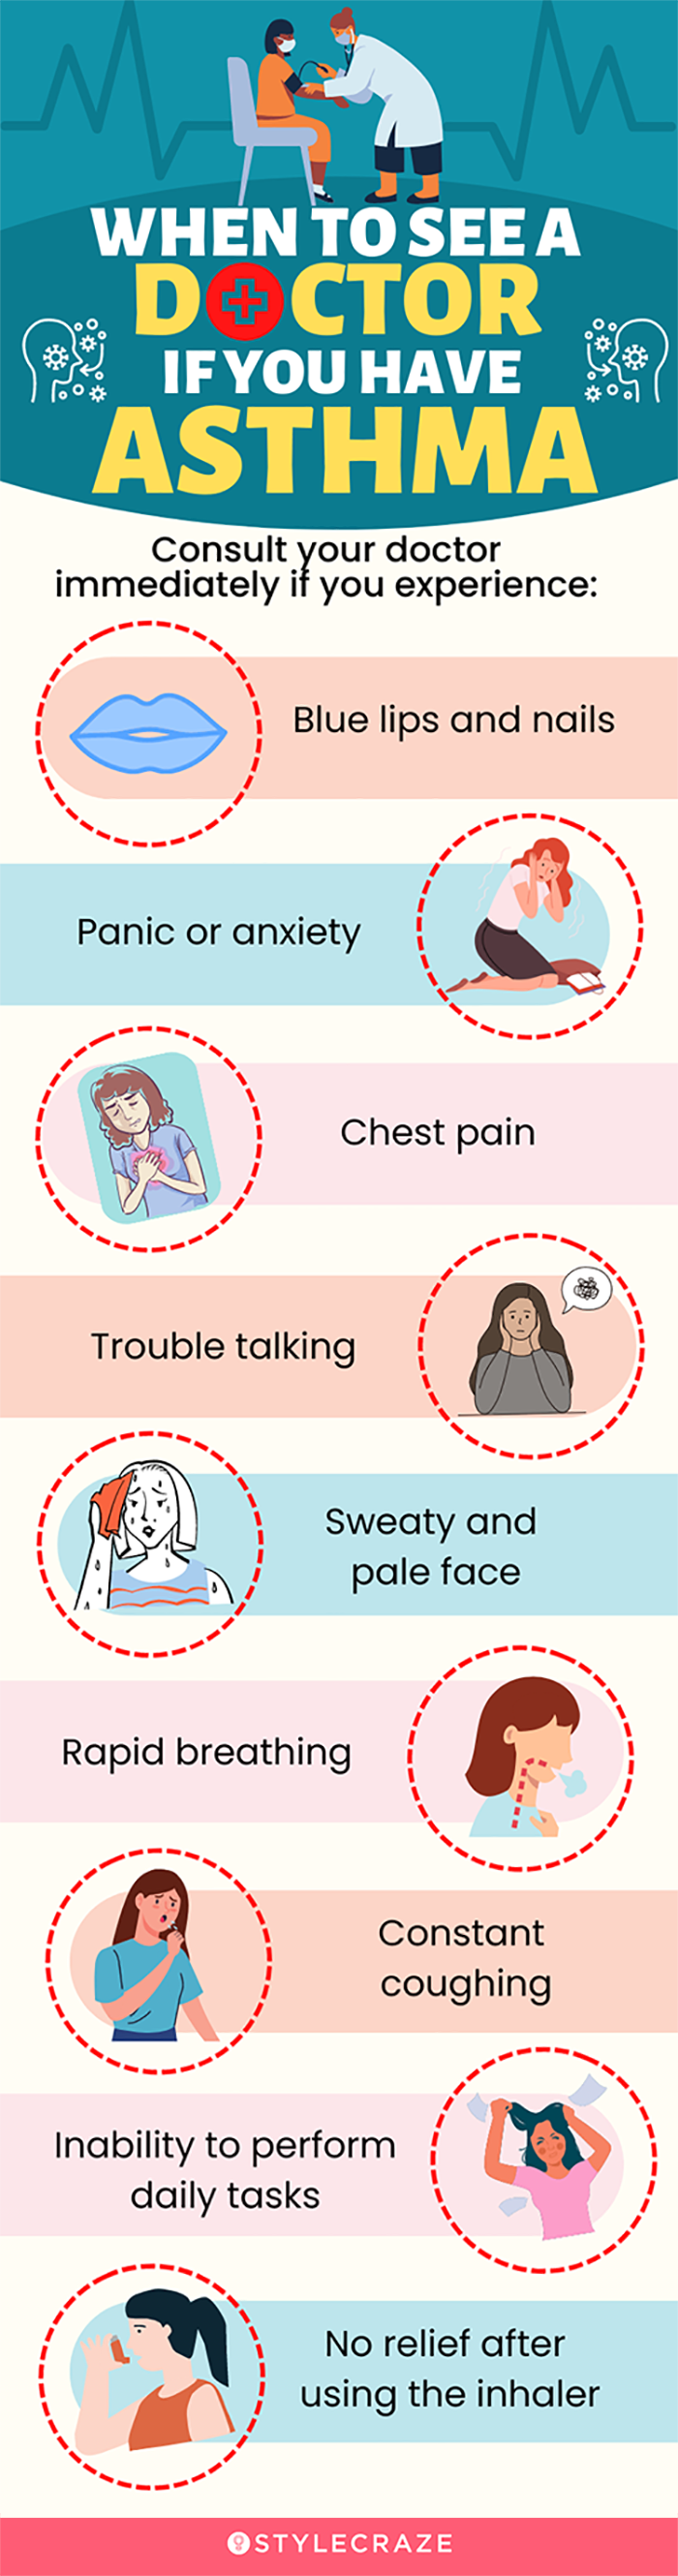 when to see a doctor if you have asthma [infographic]